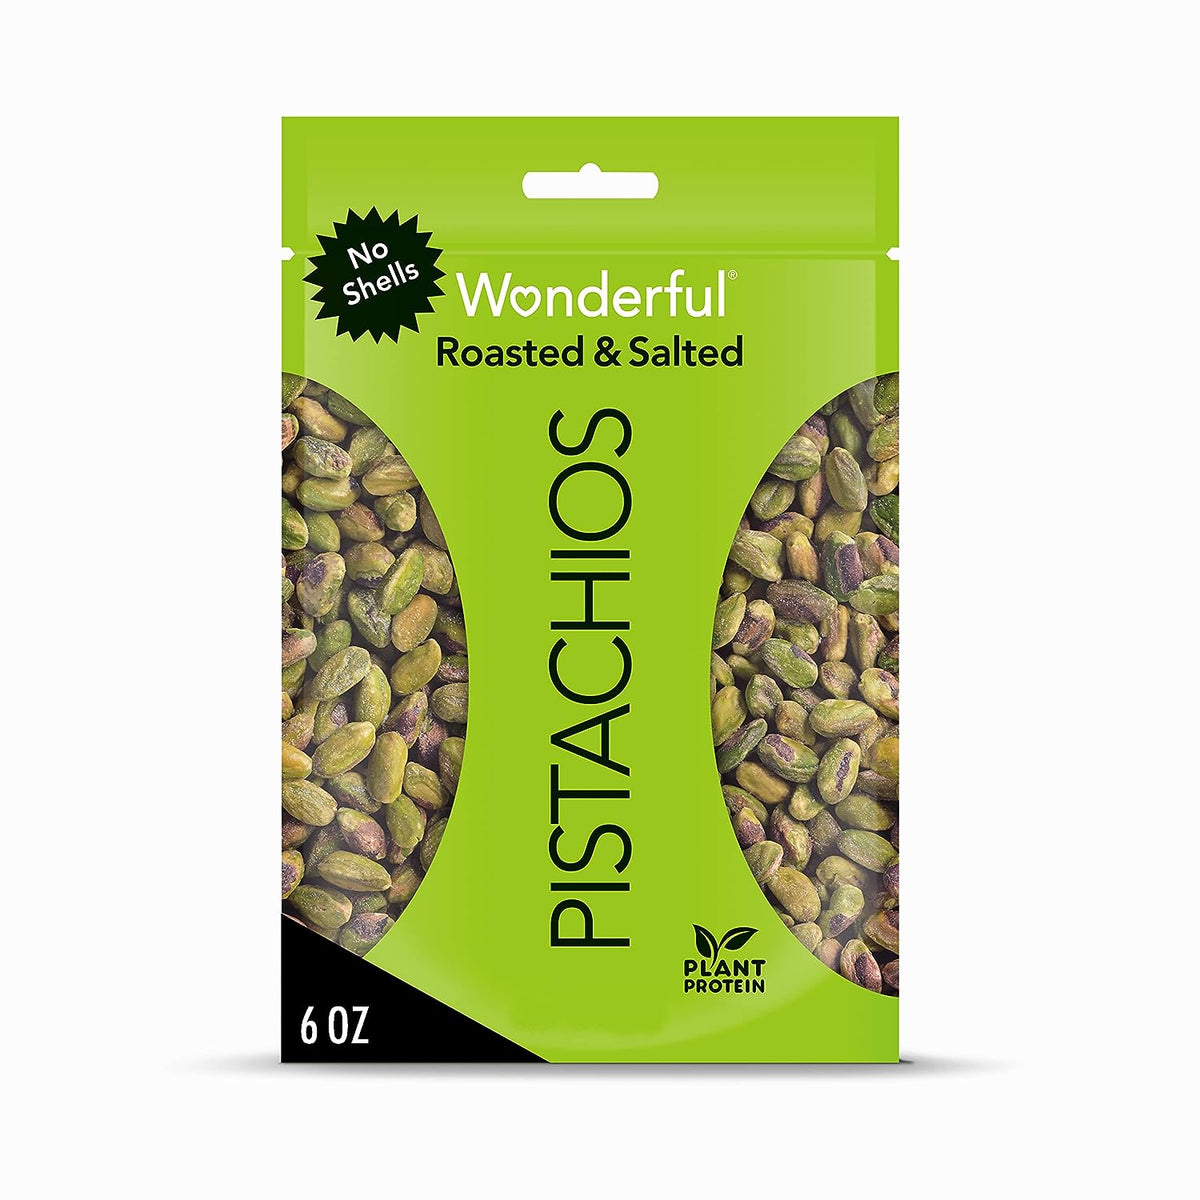 Wonderful Pistachios No Shells, Roasted and Salted Pistachios, 6 Ounce Resealable Bag